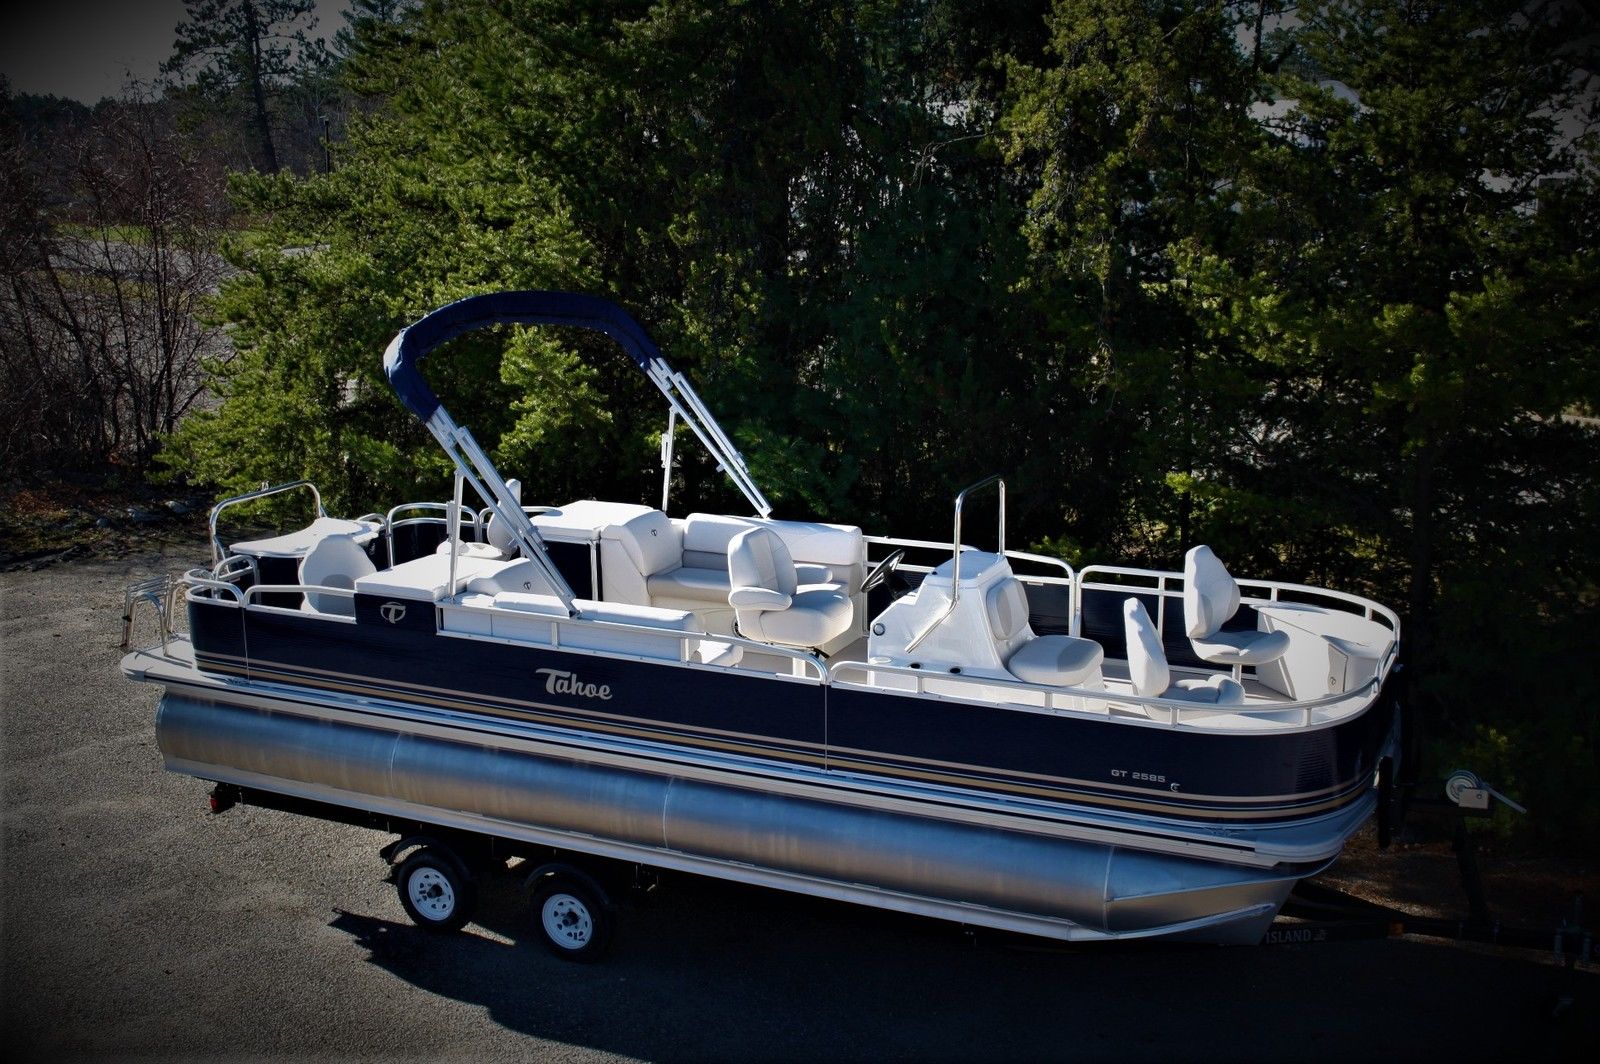 new 24 ft grand island fish and fun pontoon boat with the full camper enclo...